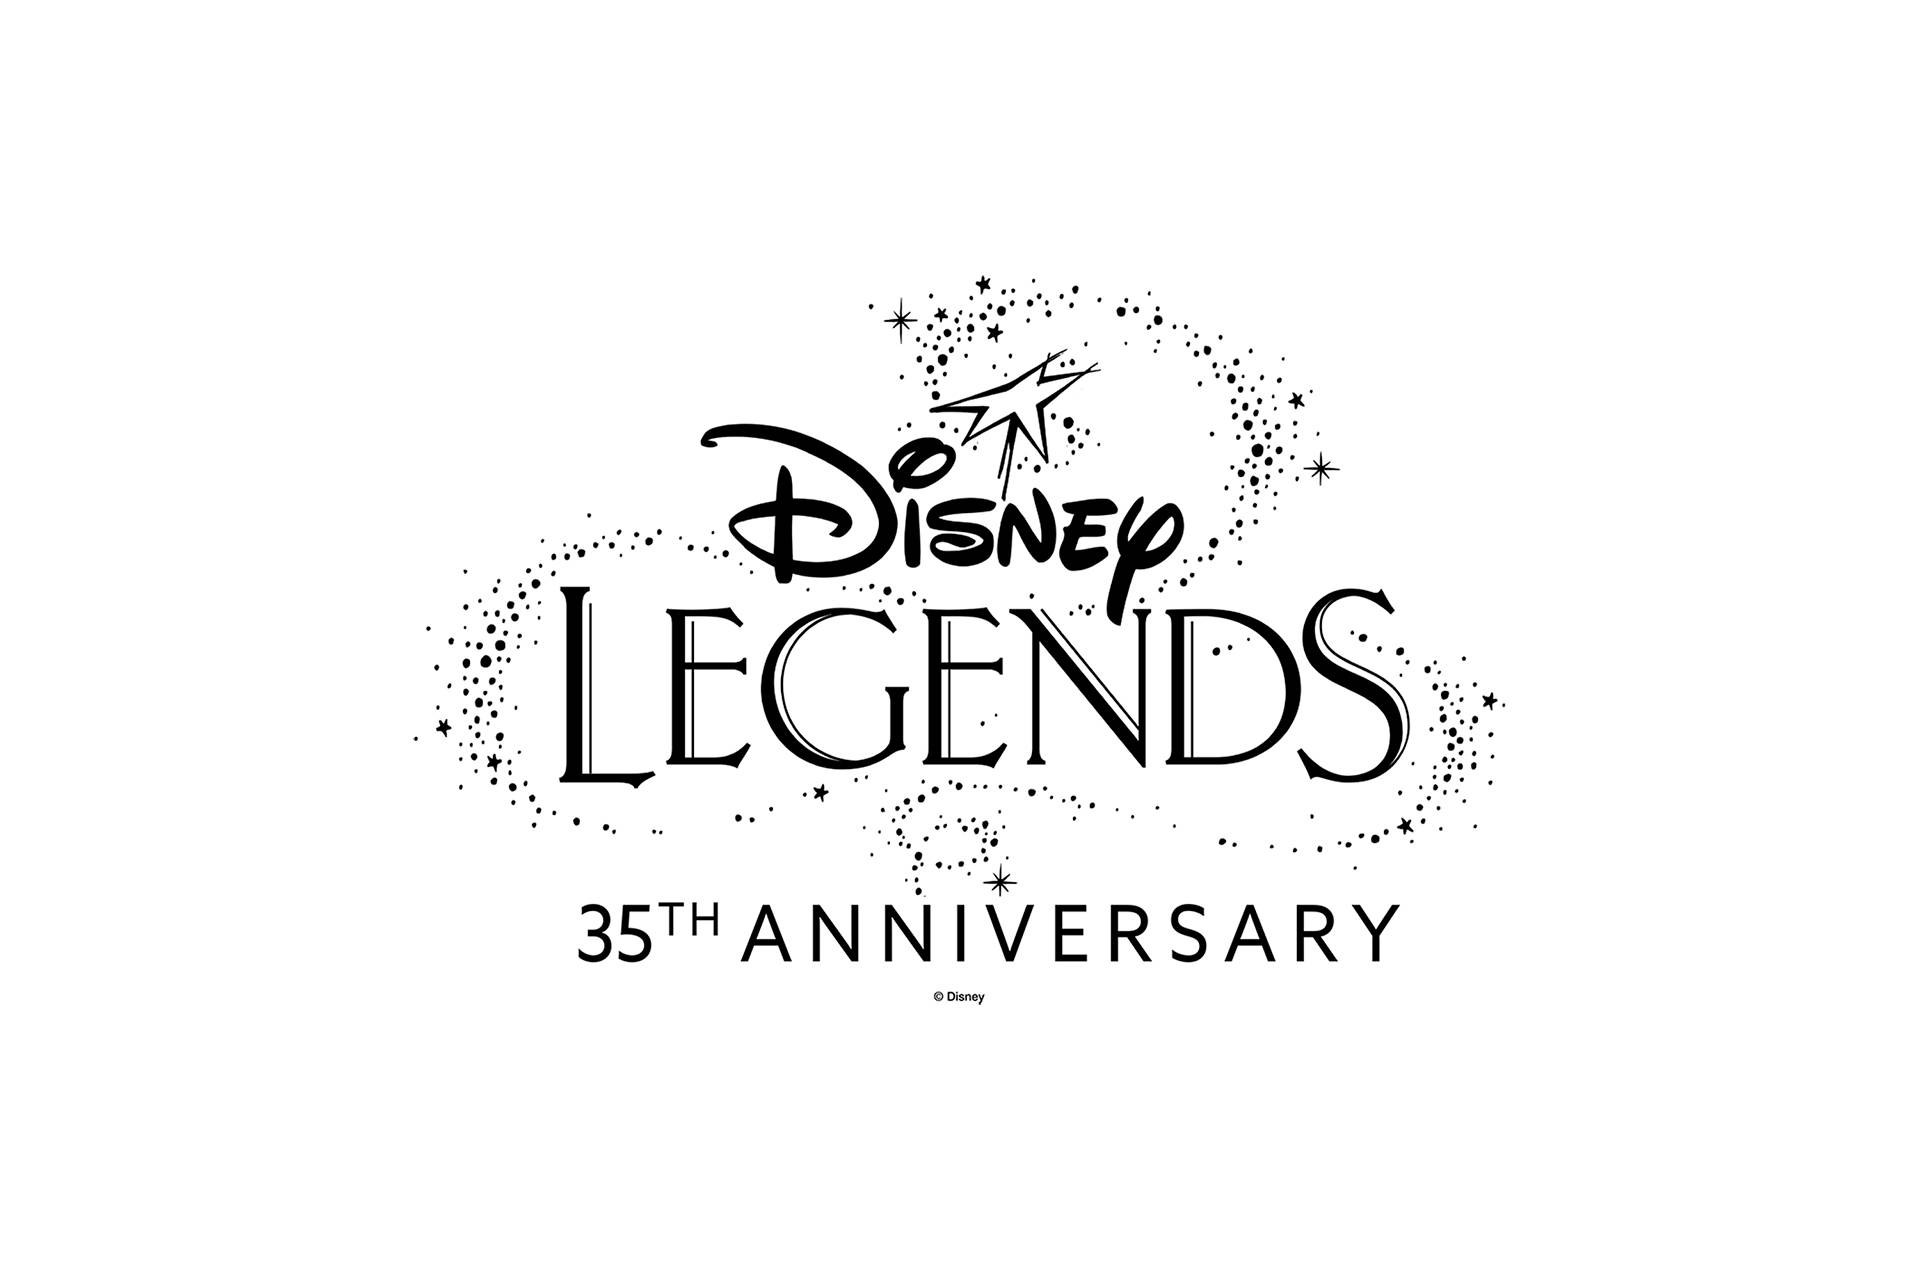 14 new Disney Legends to be honored during D23 Expo 2022